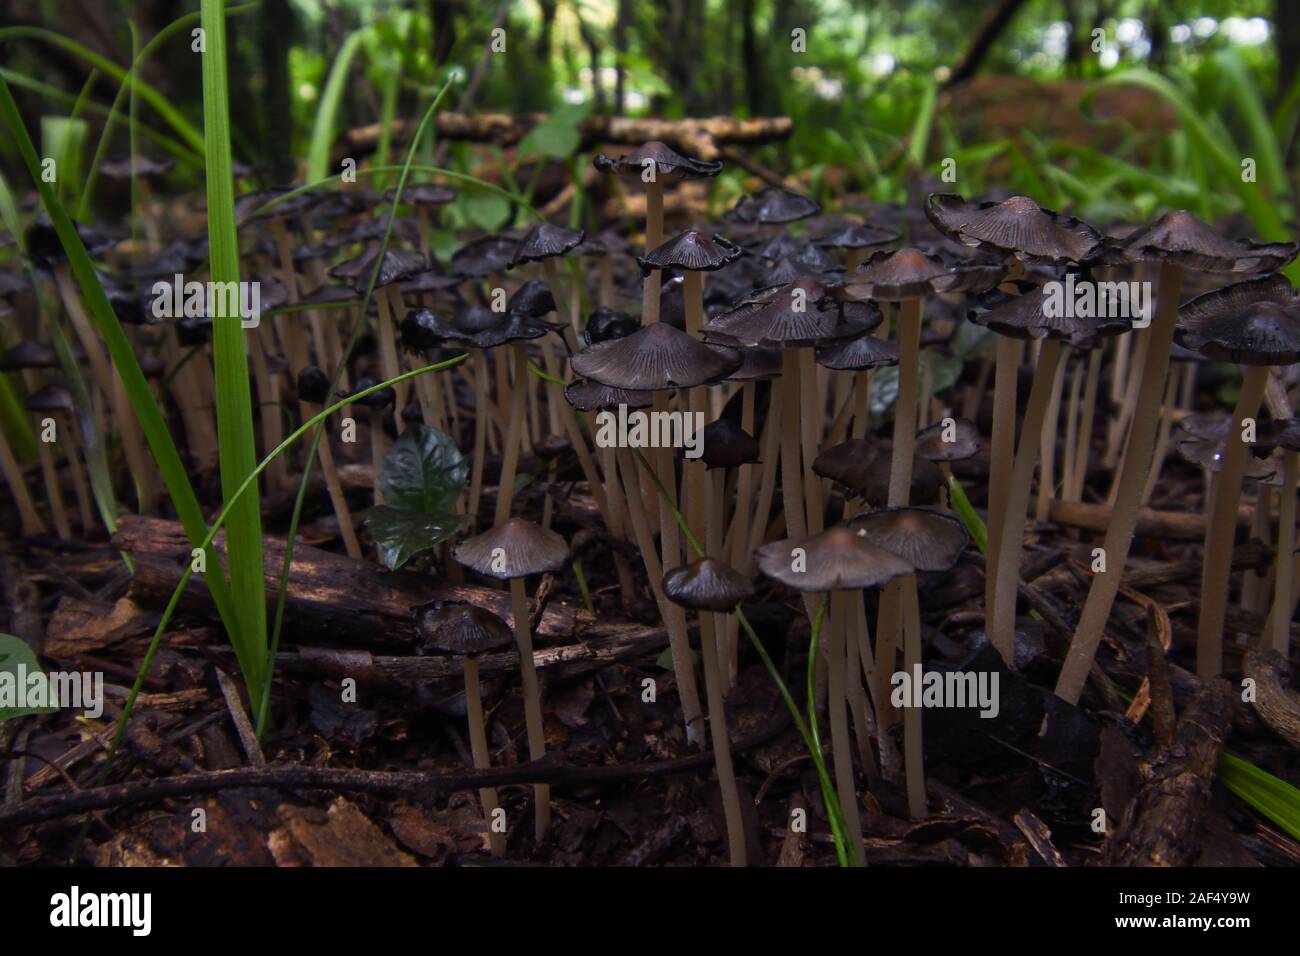 Common Ink Cap Mushroom Patch In A Forest (Coprinopsis atramentaria) Stock Photo